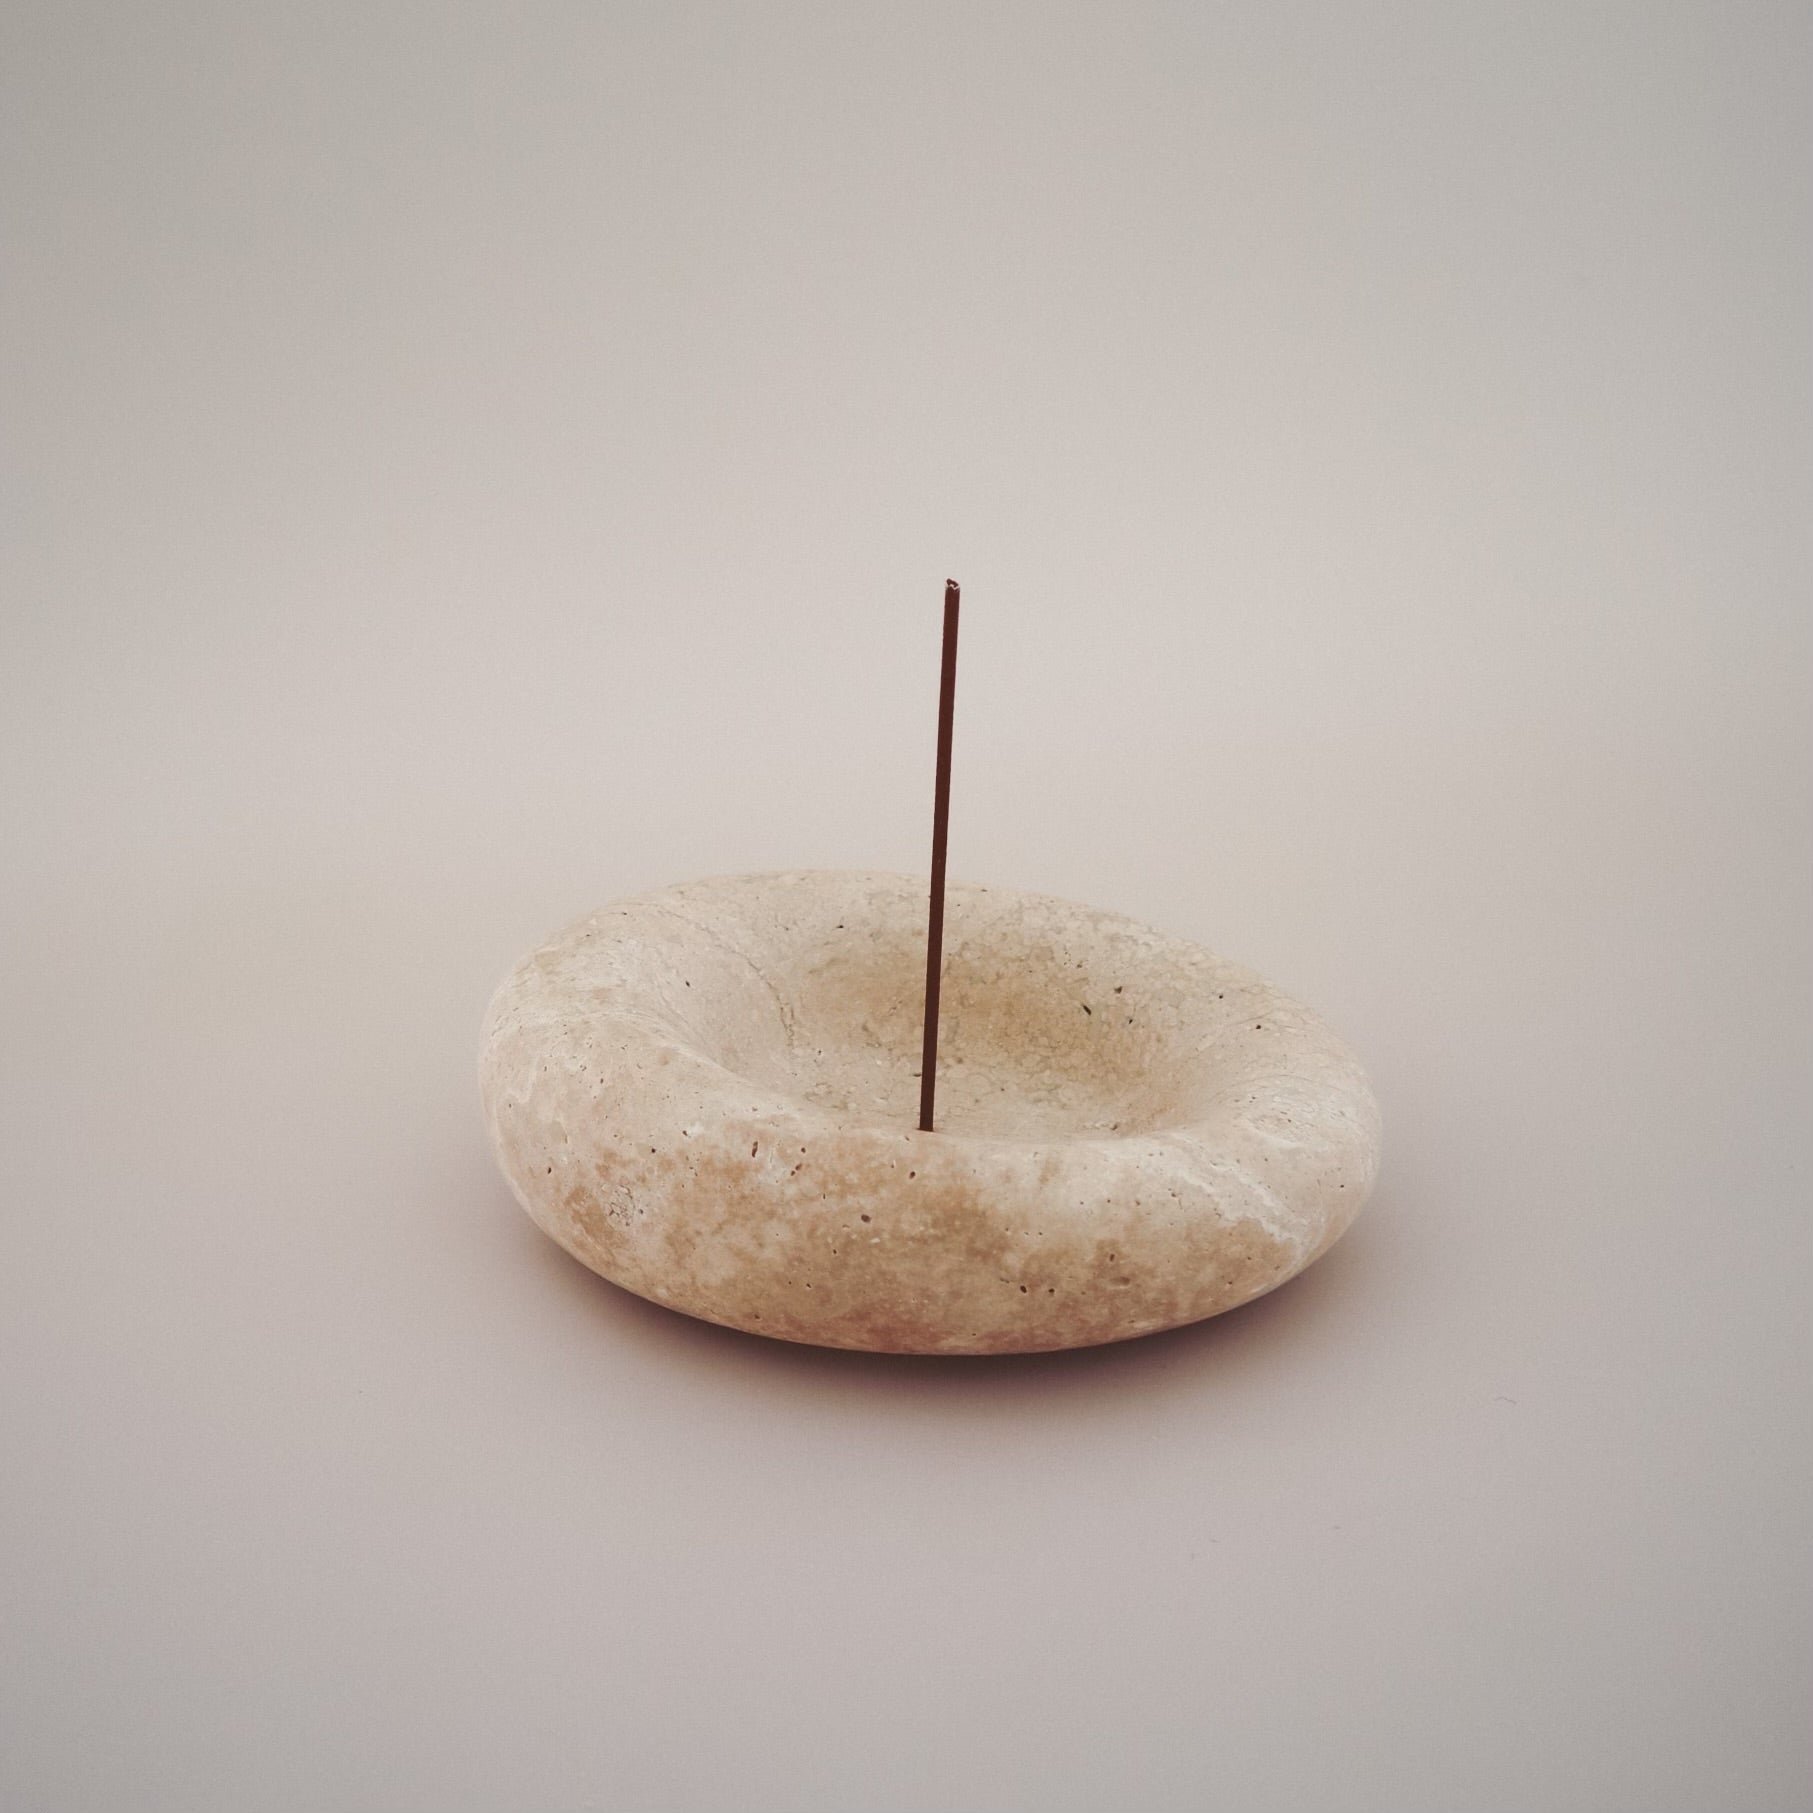 COTHEORY ECLIPSE SCULPTED INCENSE HOLDER BOWL:  BEIGE TRAVERTINE